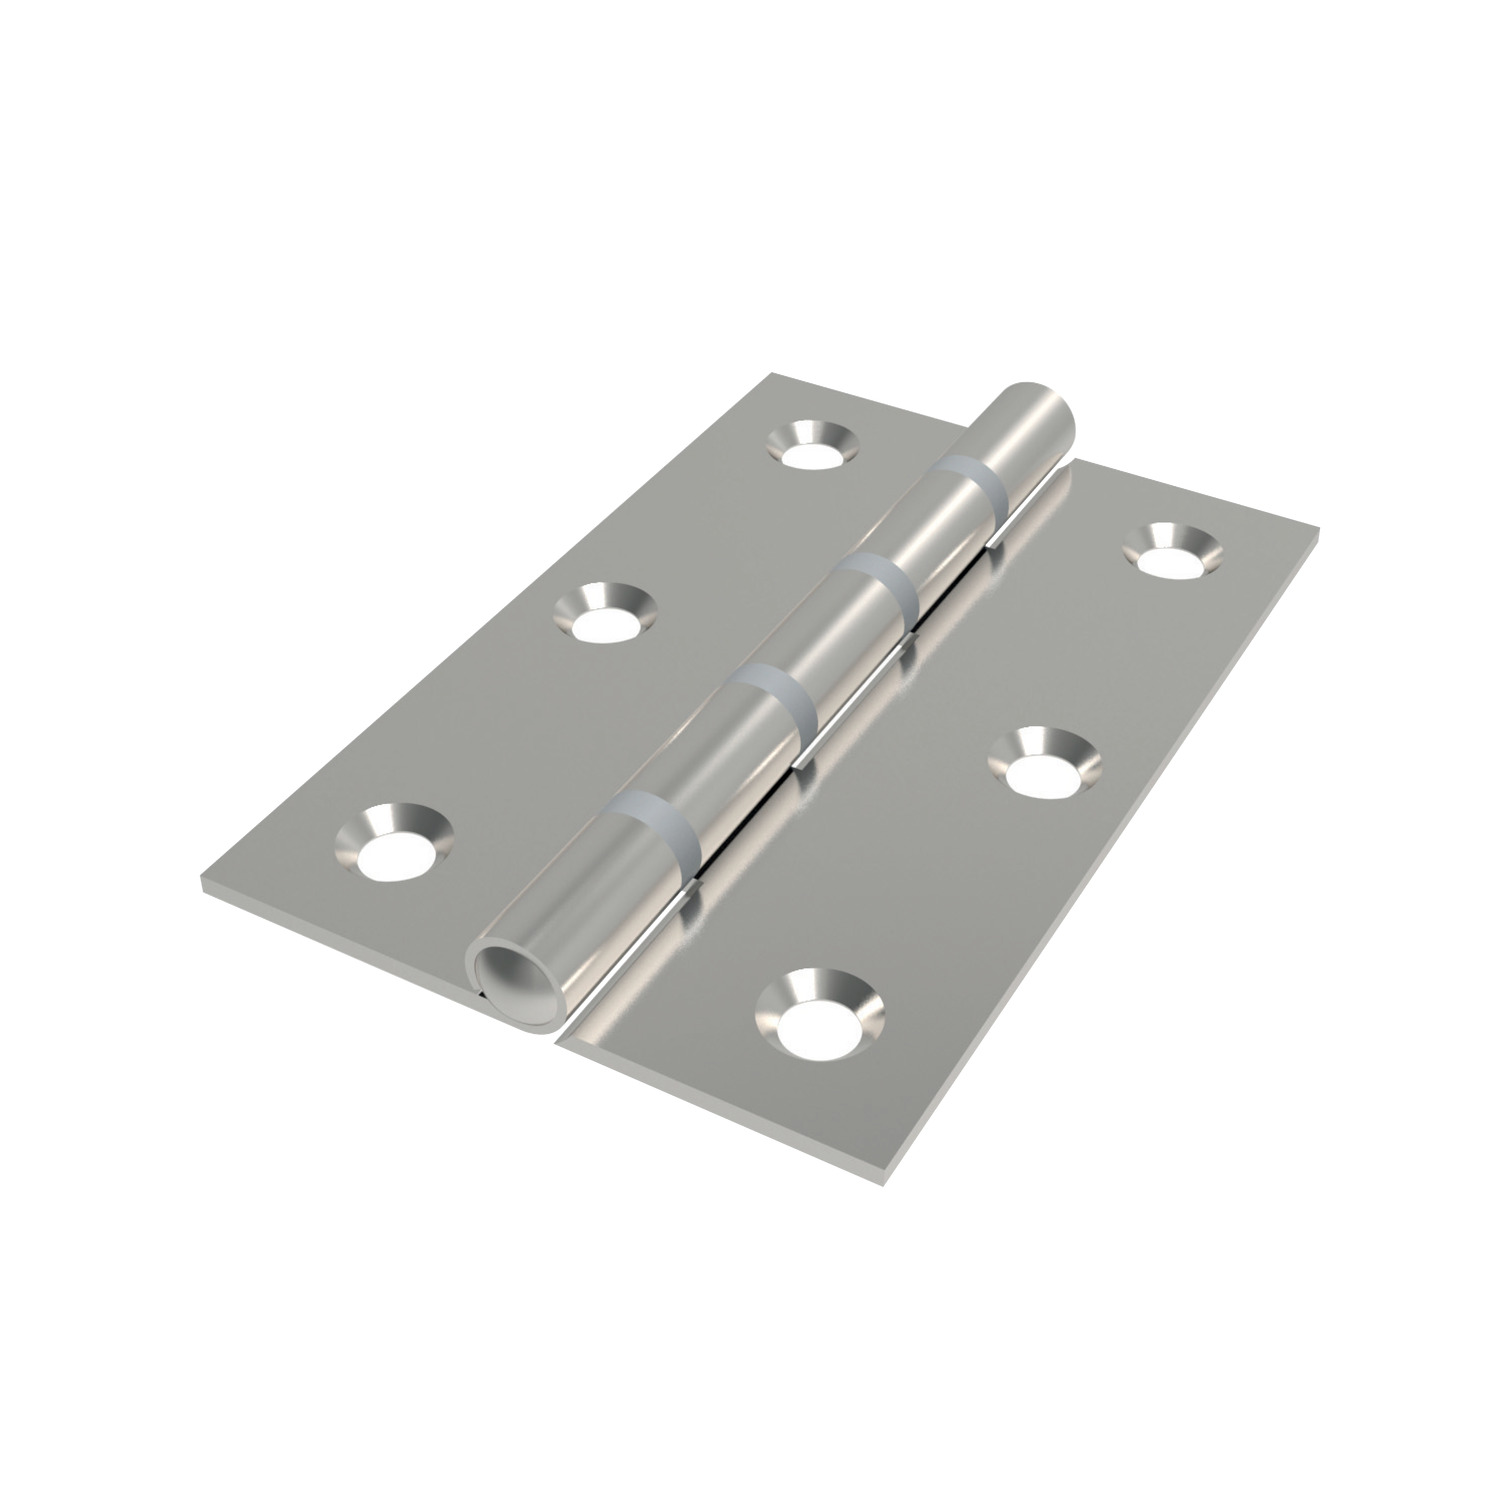 Surface Mount - Leaf hinges Surface mount external hinges with polyacetal bushing. Made from stainless steel.